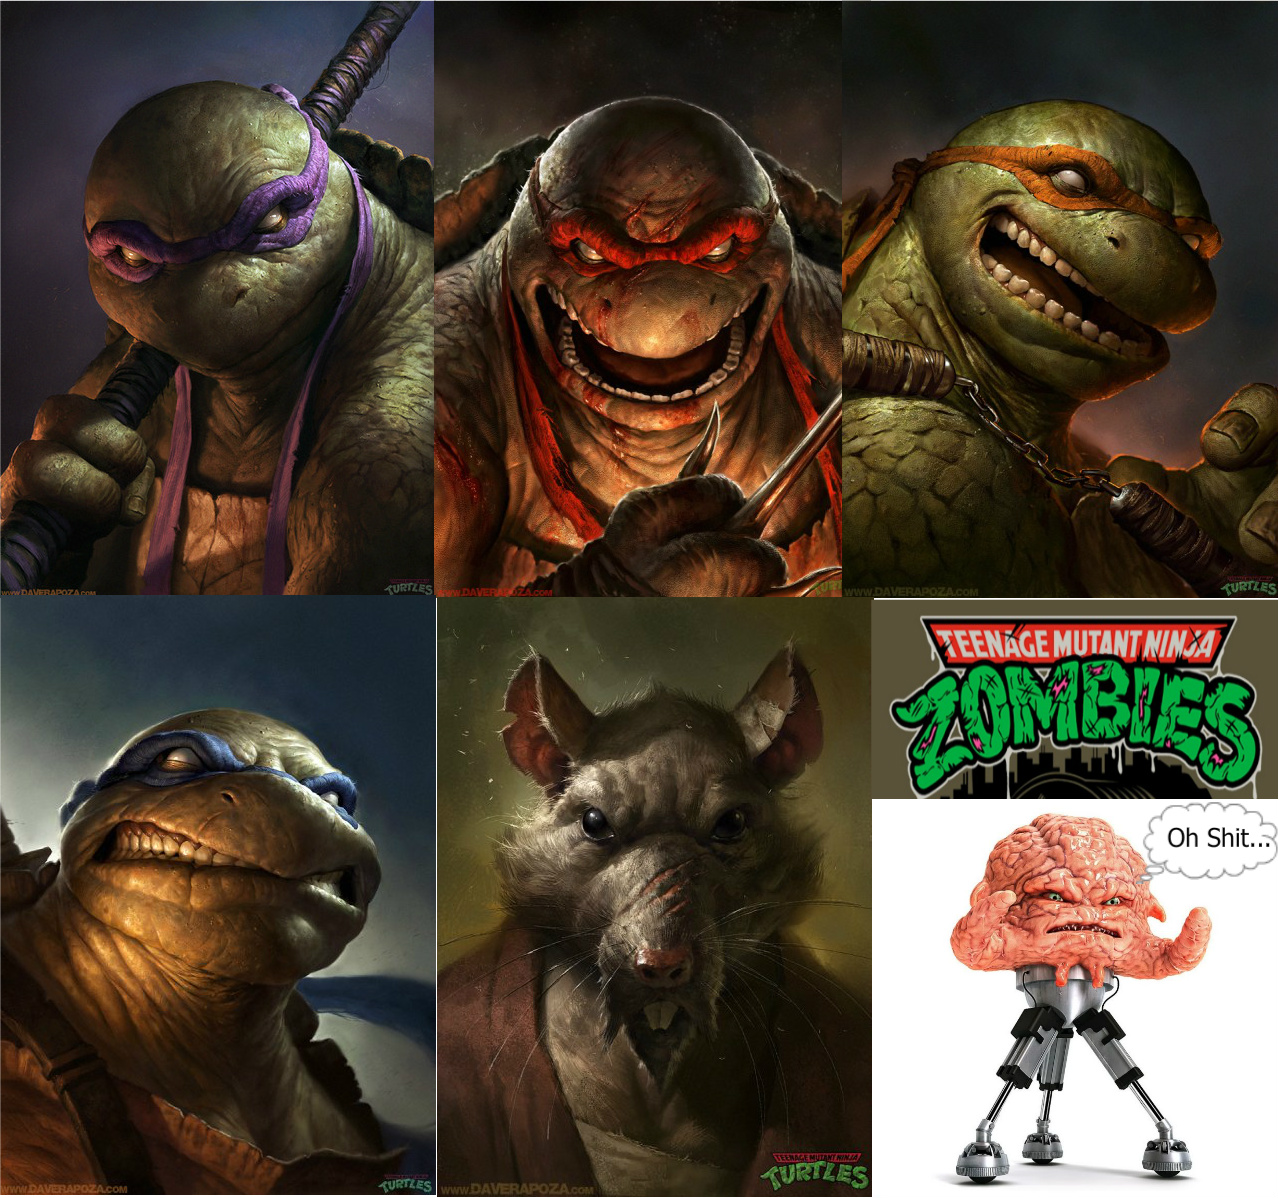 Credit to Dave Rapoza for the zombie turtles images